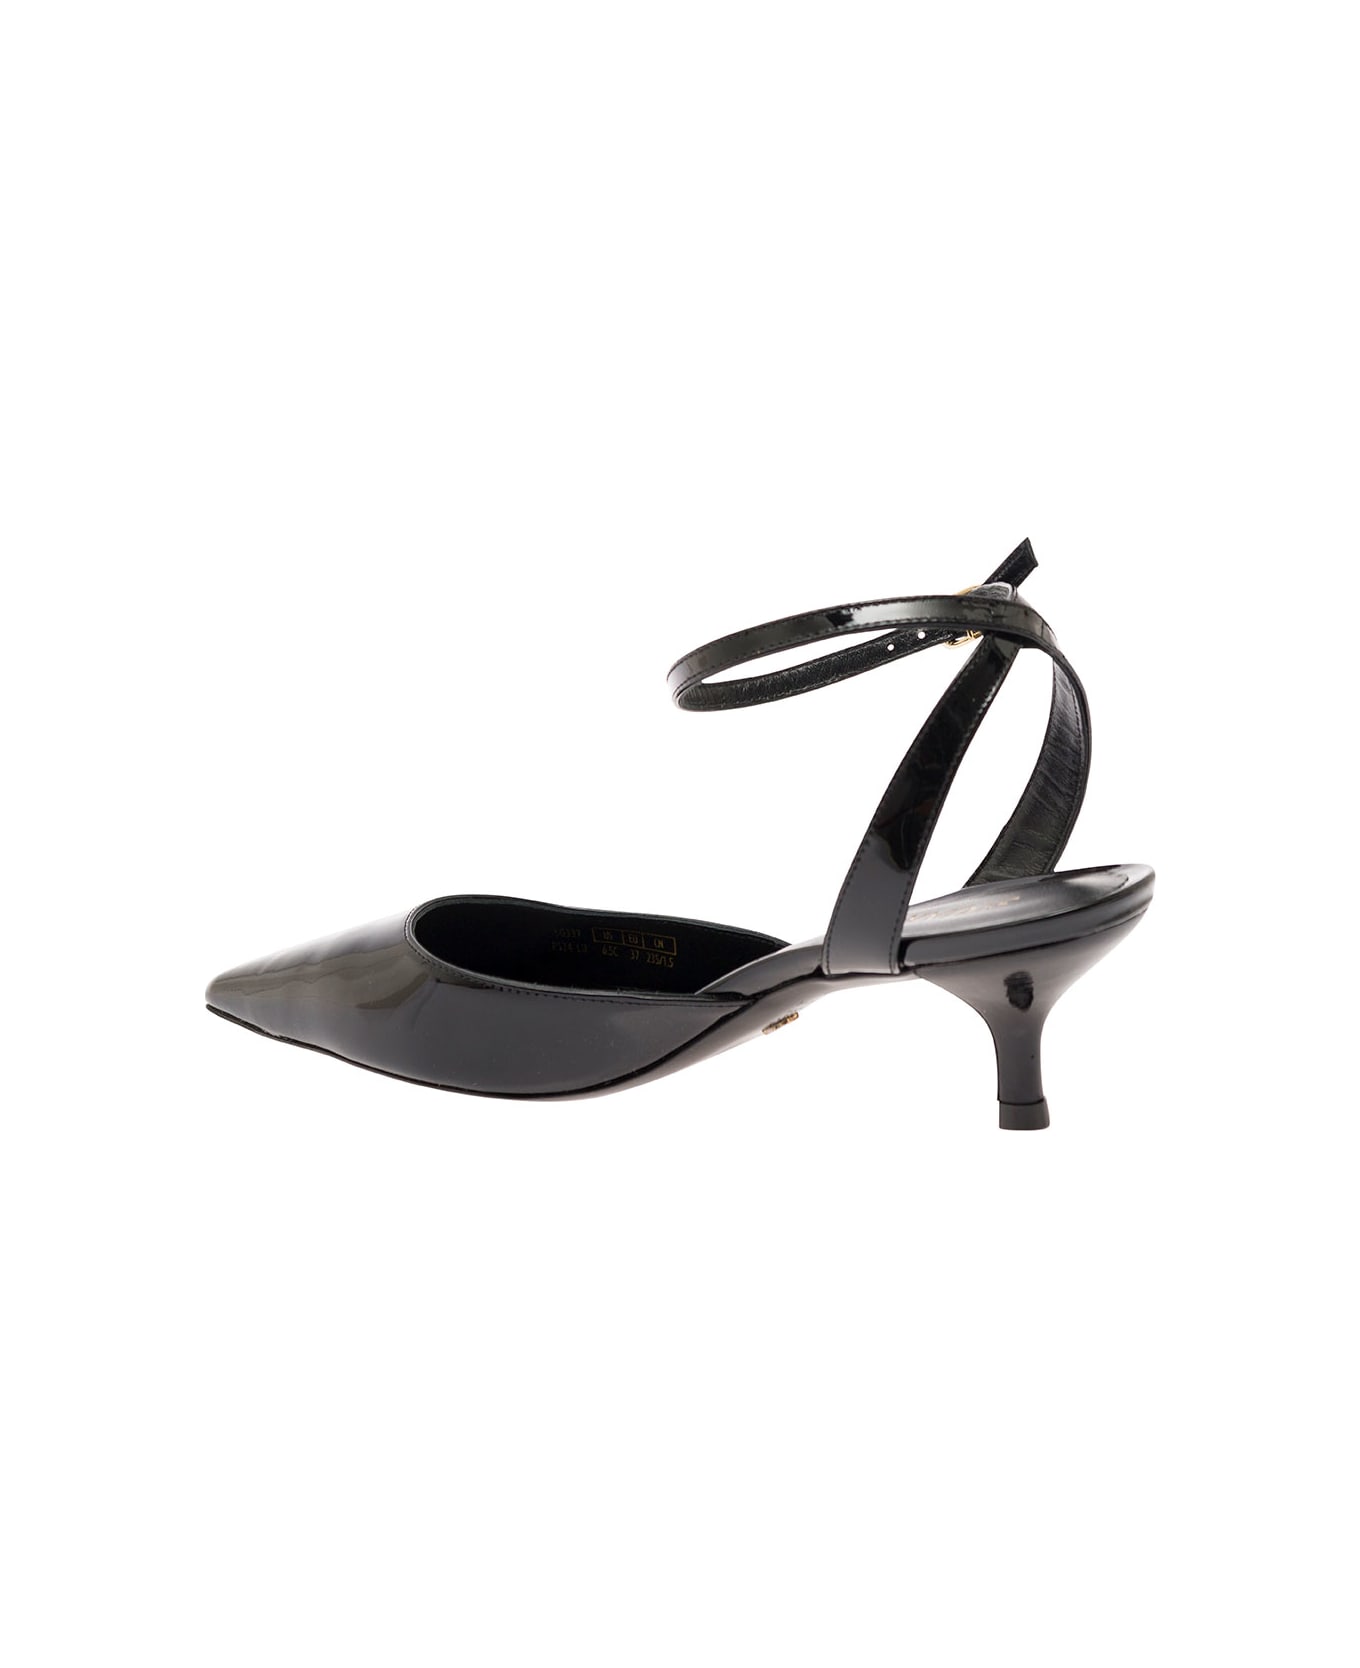 Stuart Weitzman 'barelythere' Black Pumps With Ankle Strap In Patent Leather Woman - Black ハイヒール